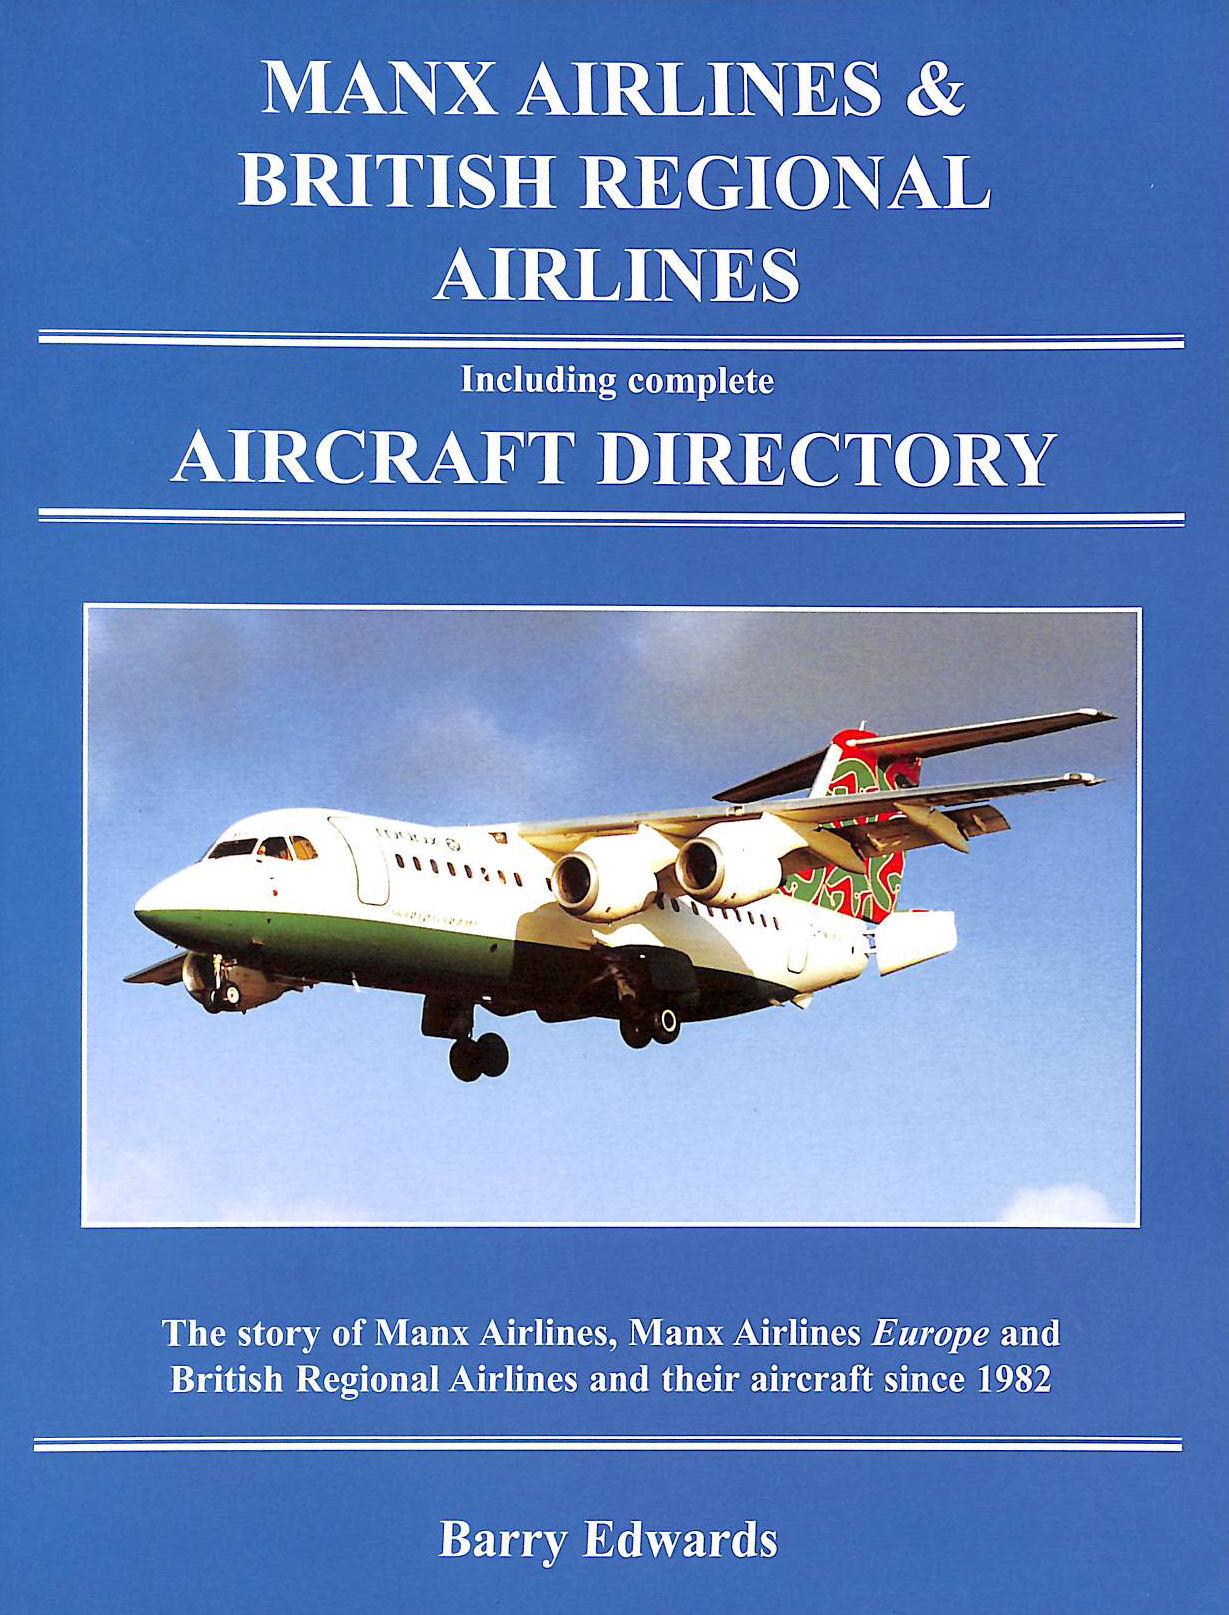 EDWARDS, BARRY - Manx Airlines and British Regional Airlines: Including Complete Aircraft Directory